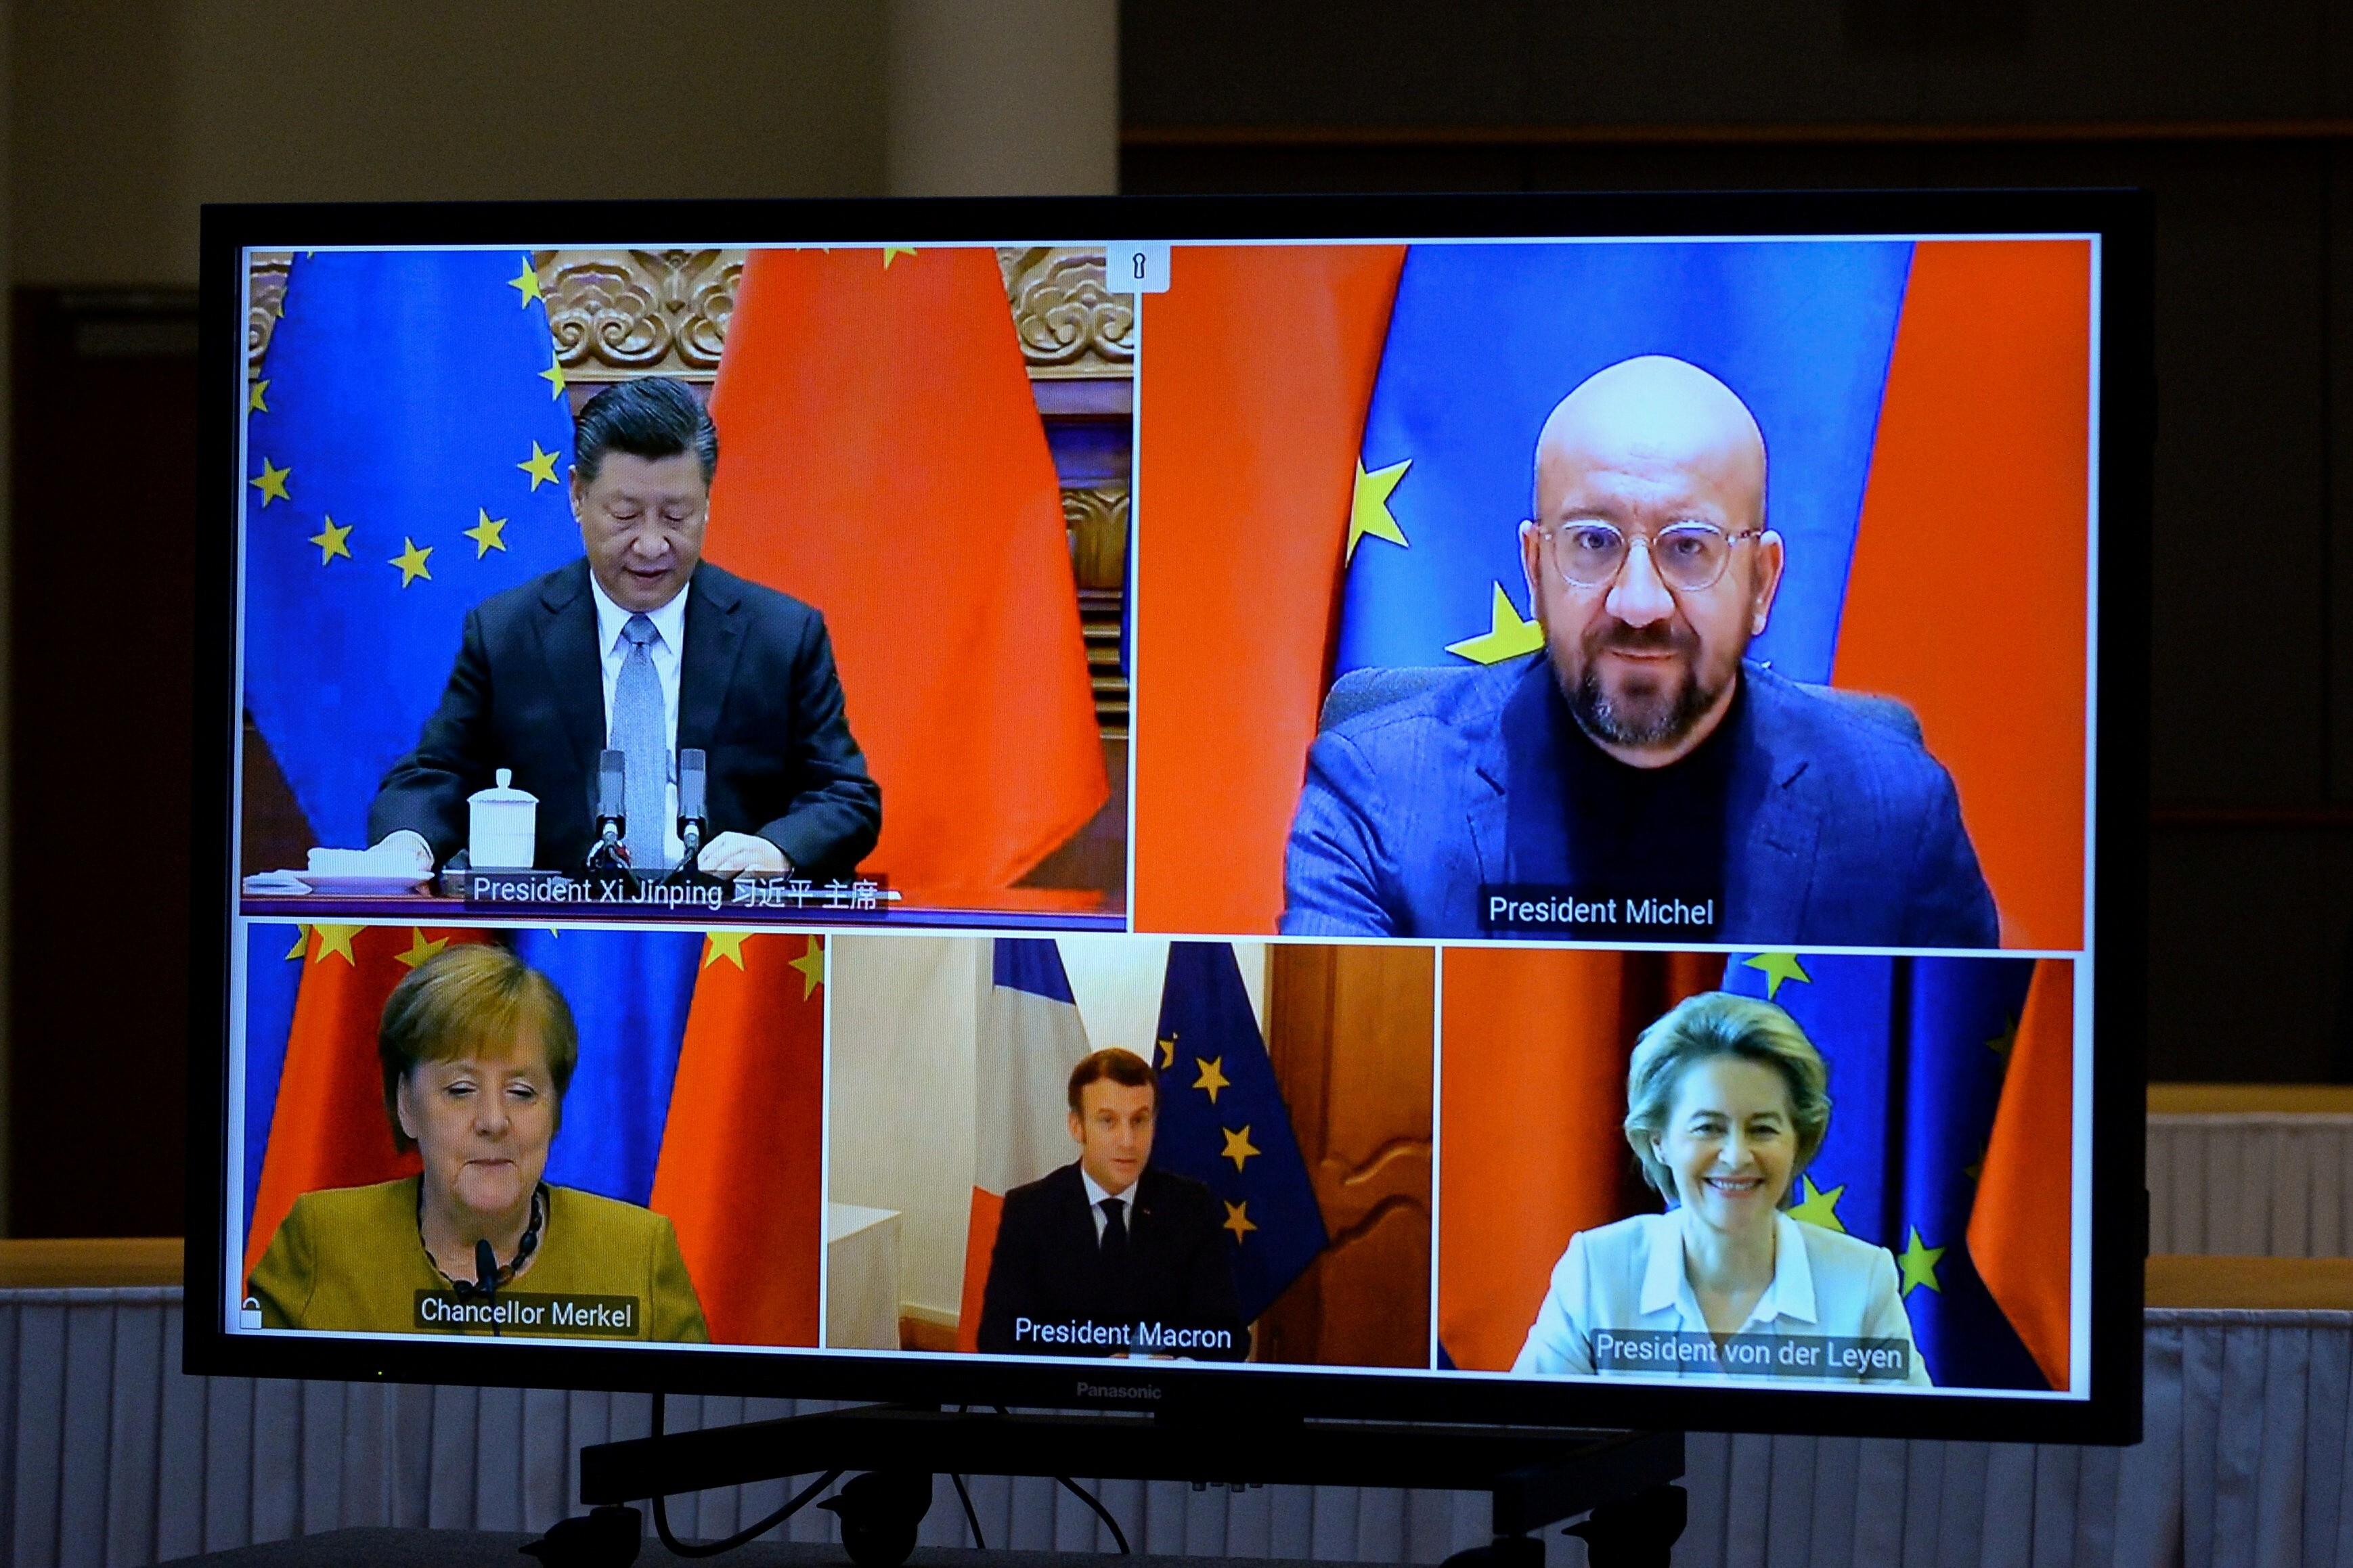 China and the EU reached in-principle agreement on an investment deal at a video conference call on December 30, attended by (from top left, clockwise) Chinese President Xi Jinping, European Council president Charles Michel, European Commission president Ursula von der Leyen, French President Emmanuel Macron and German Chancellor Angela Merkel. Photo: Reuters